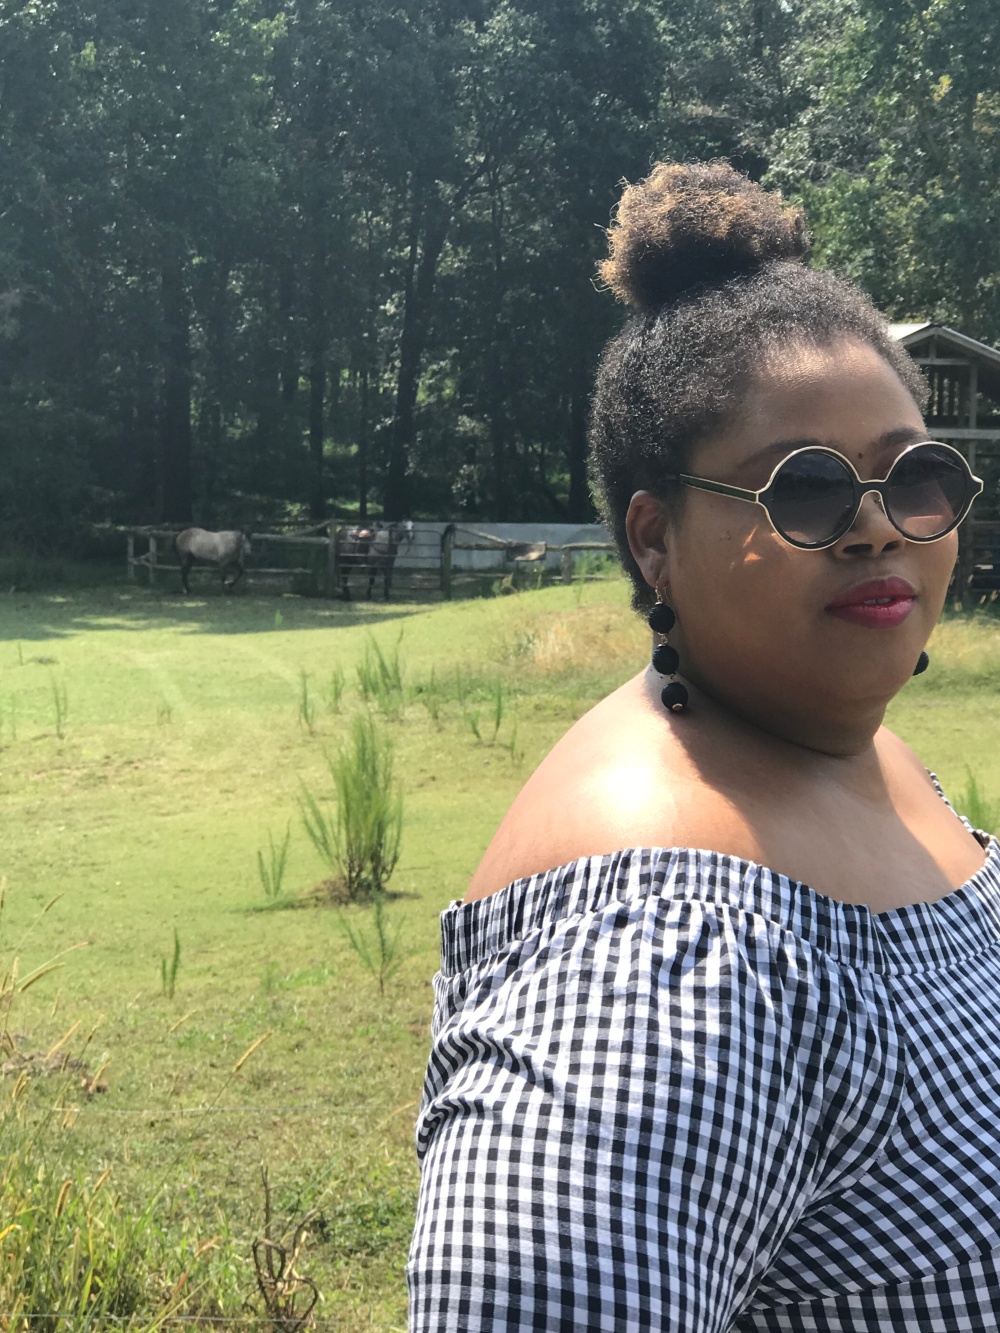 Black people like country, too. Airbnb provided the perfect country living, farmhouse getaway. http://FinesseCurves.com